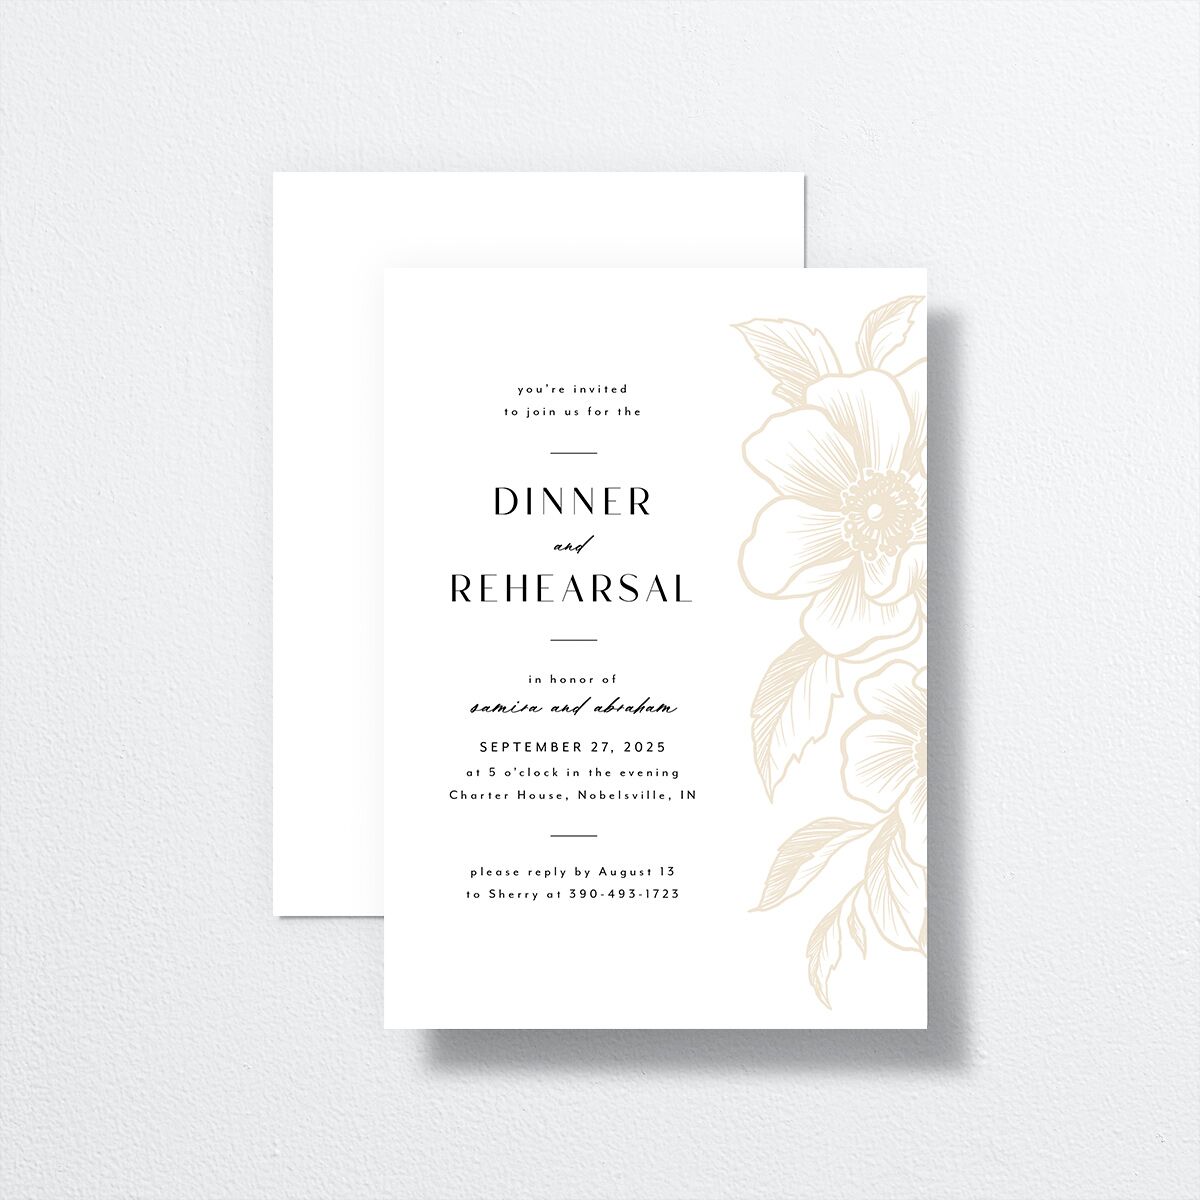 Exotic Rehearsal Dinner Invitations by Vera Wang front-and-back